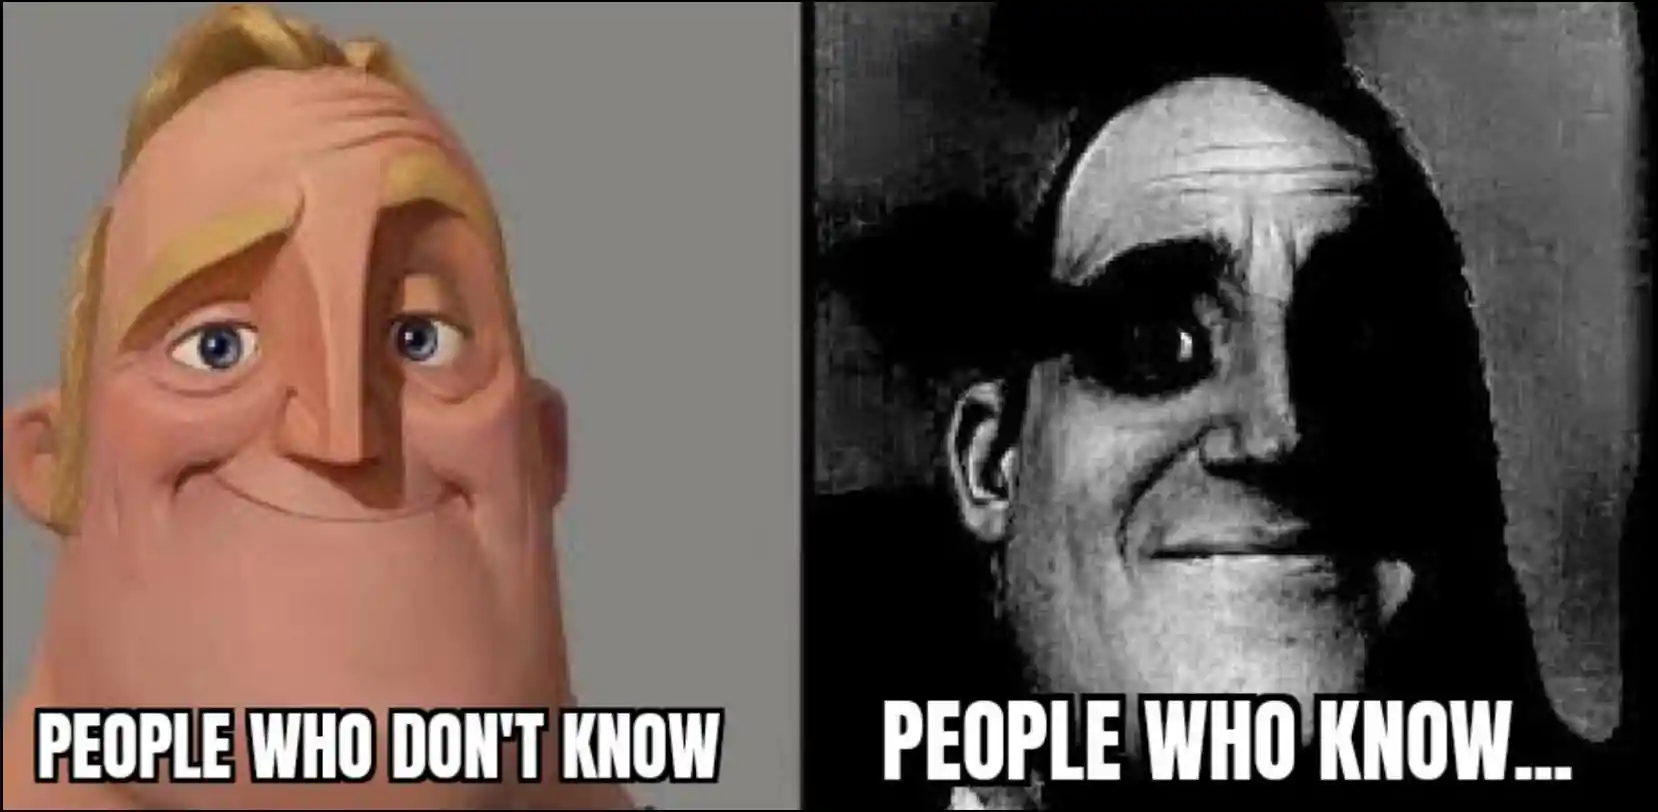 People Who Don't Know Vs. People Who Know.jpeg